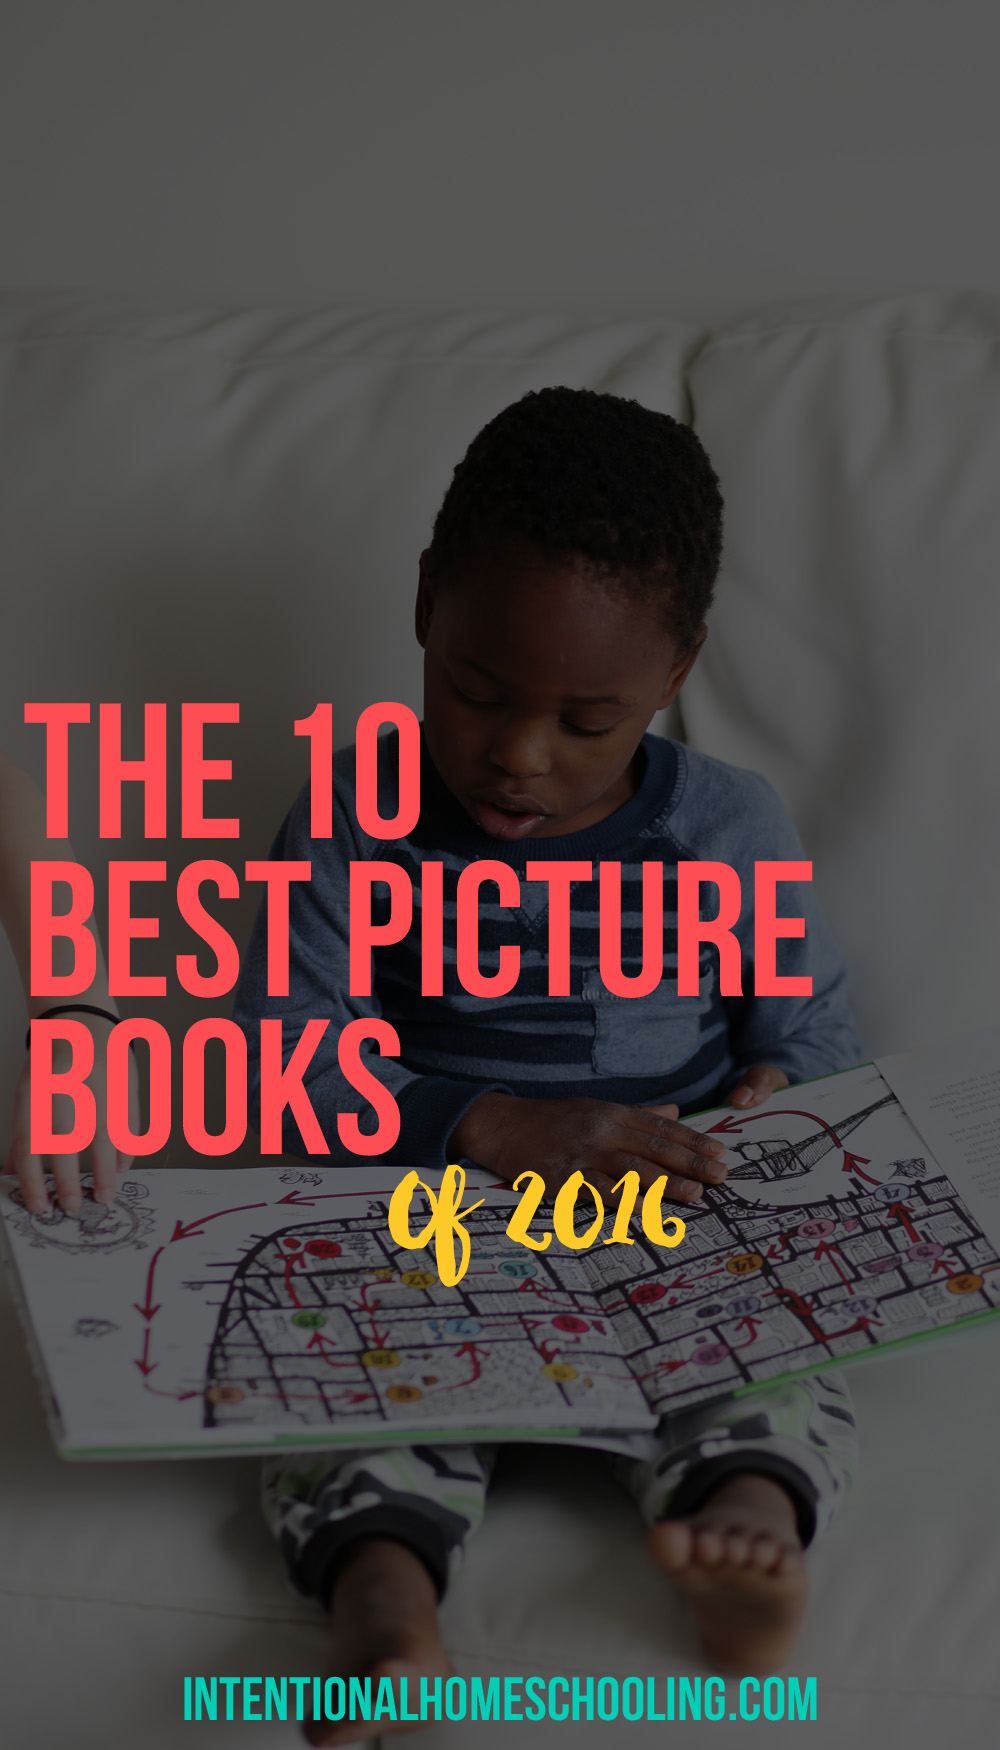 The Ten Best Picture Books Published in 2016 - our absolute favorites!